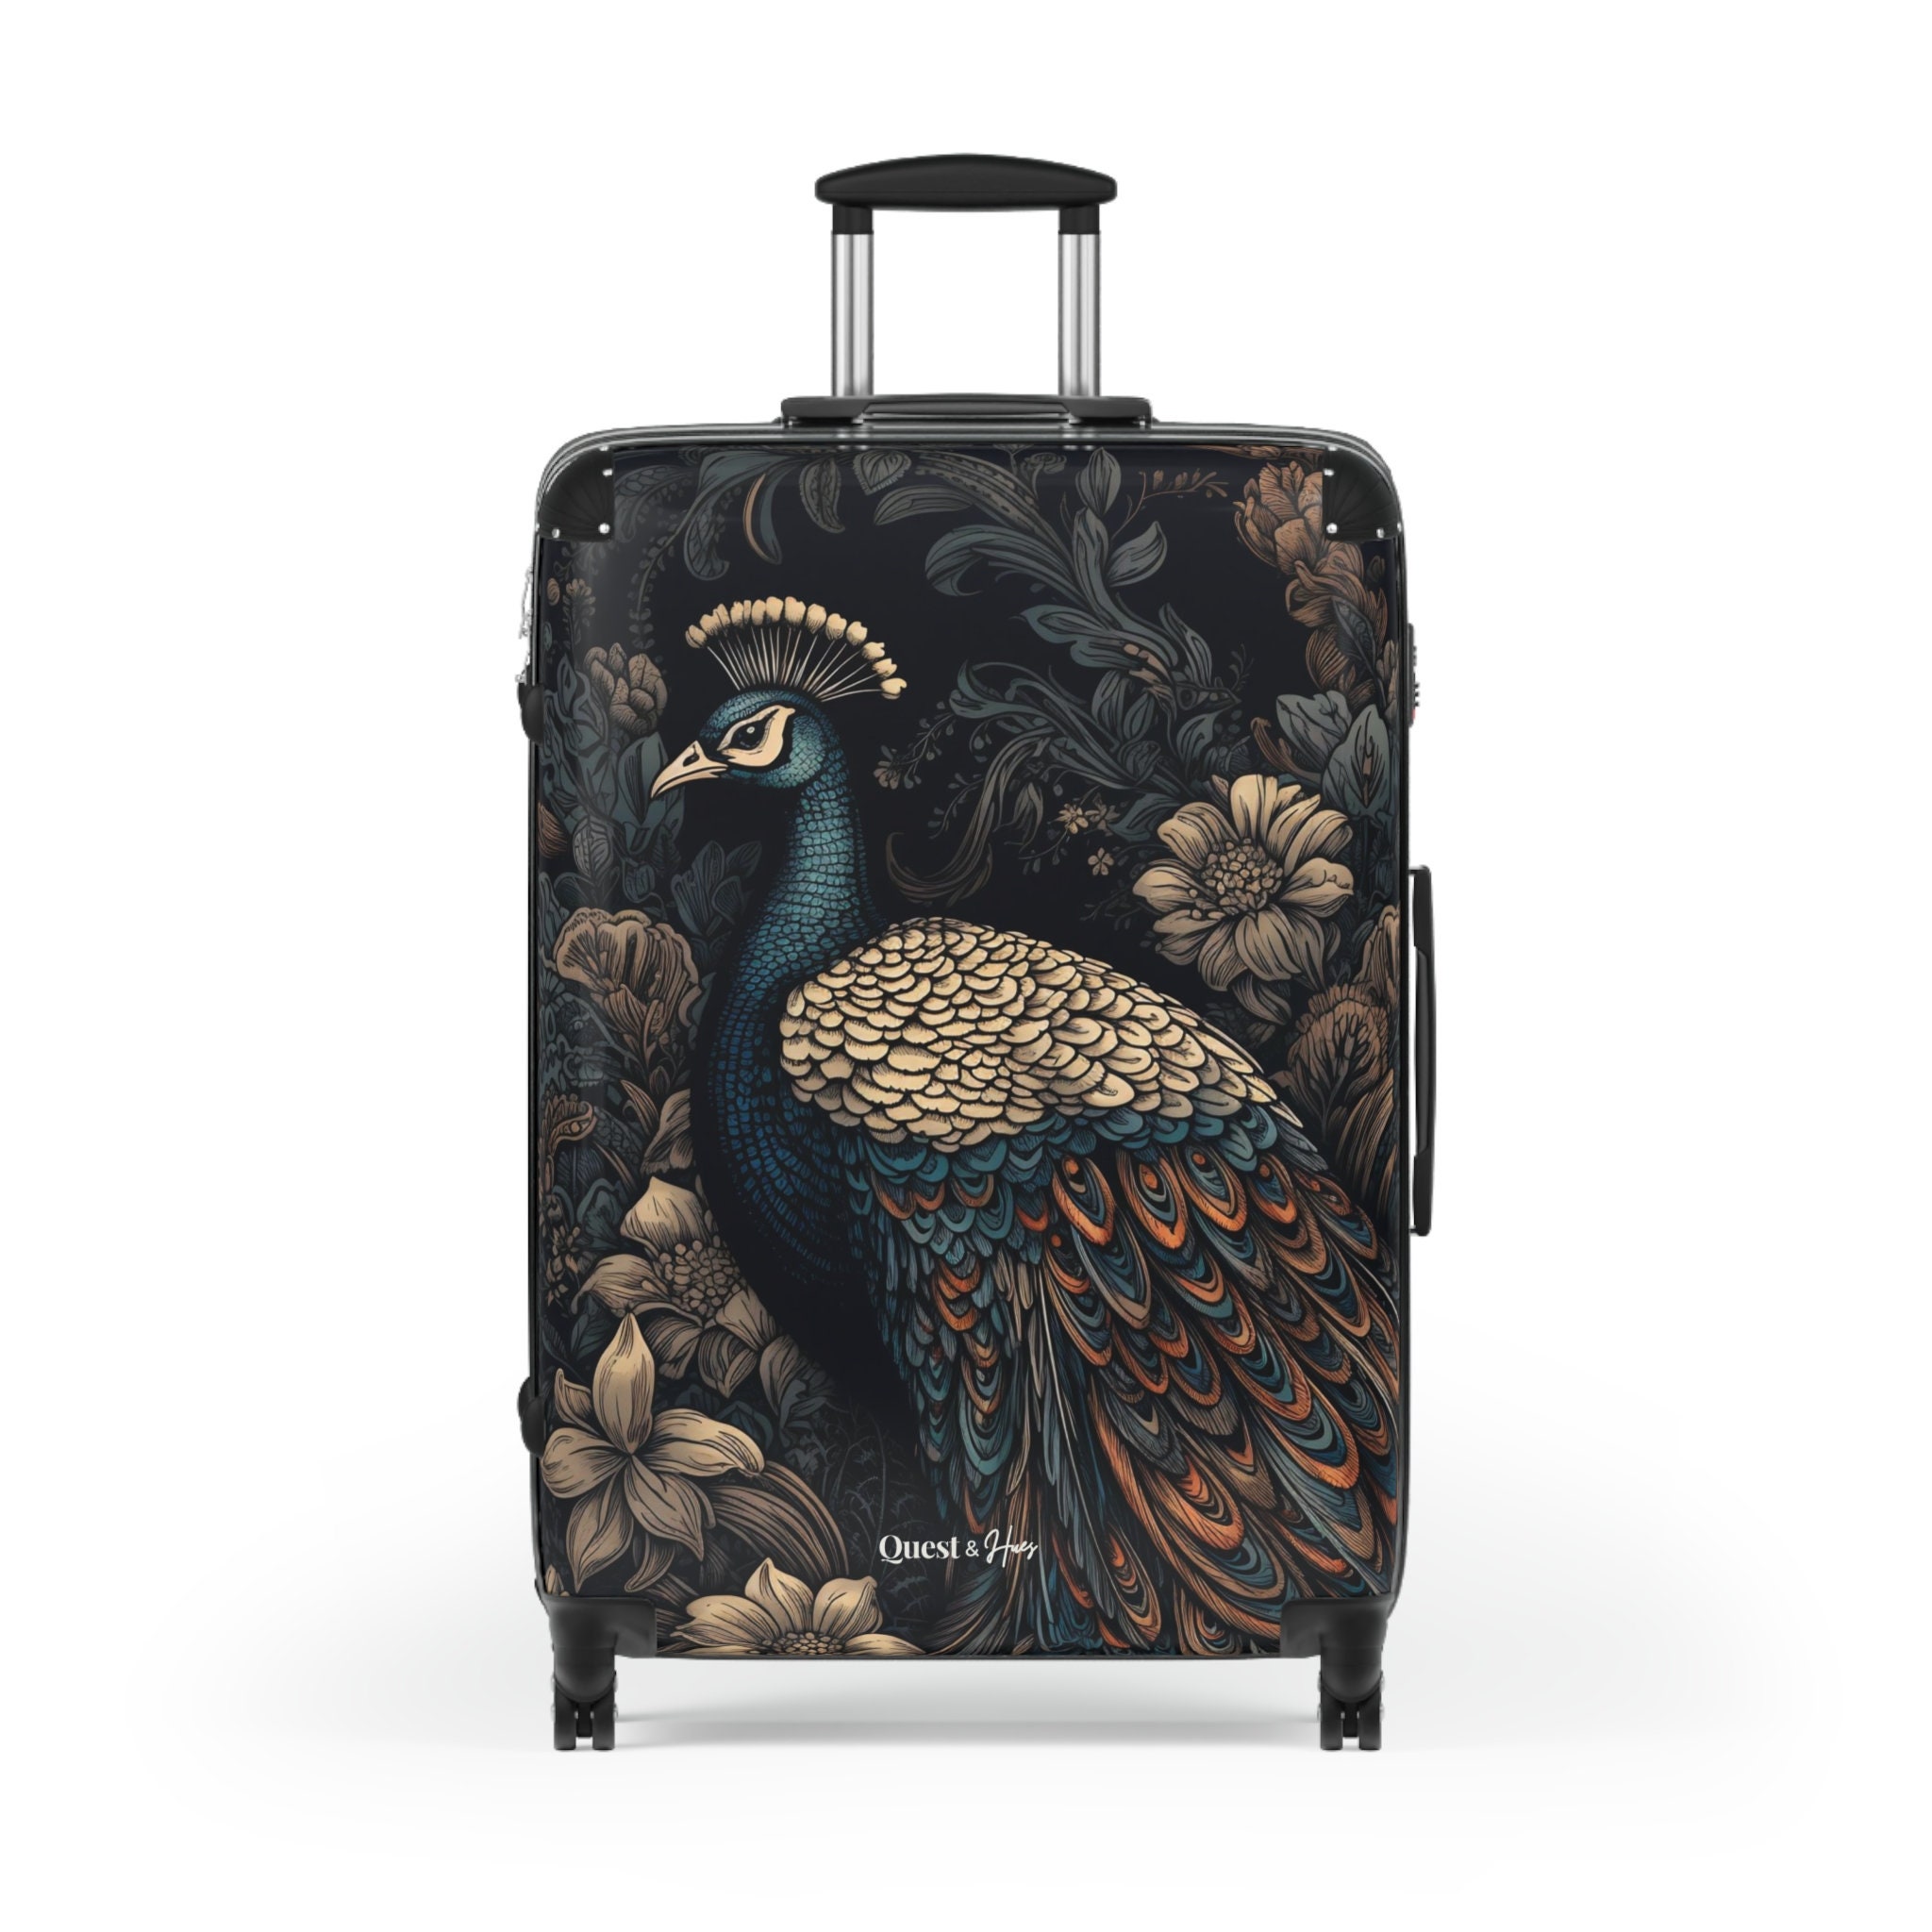 Peacock Lover Suitcase, Vacation Suitcase